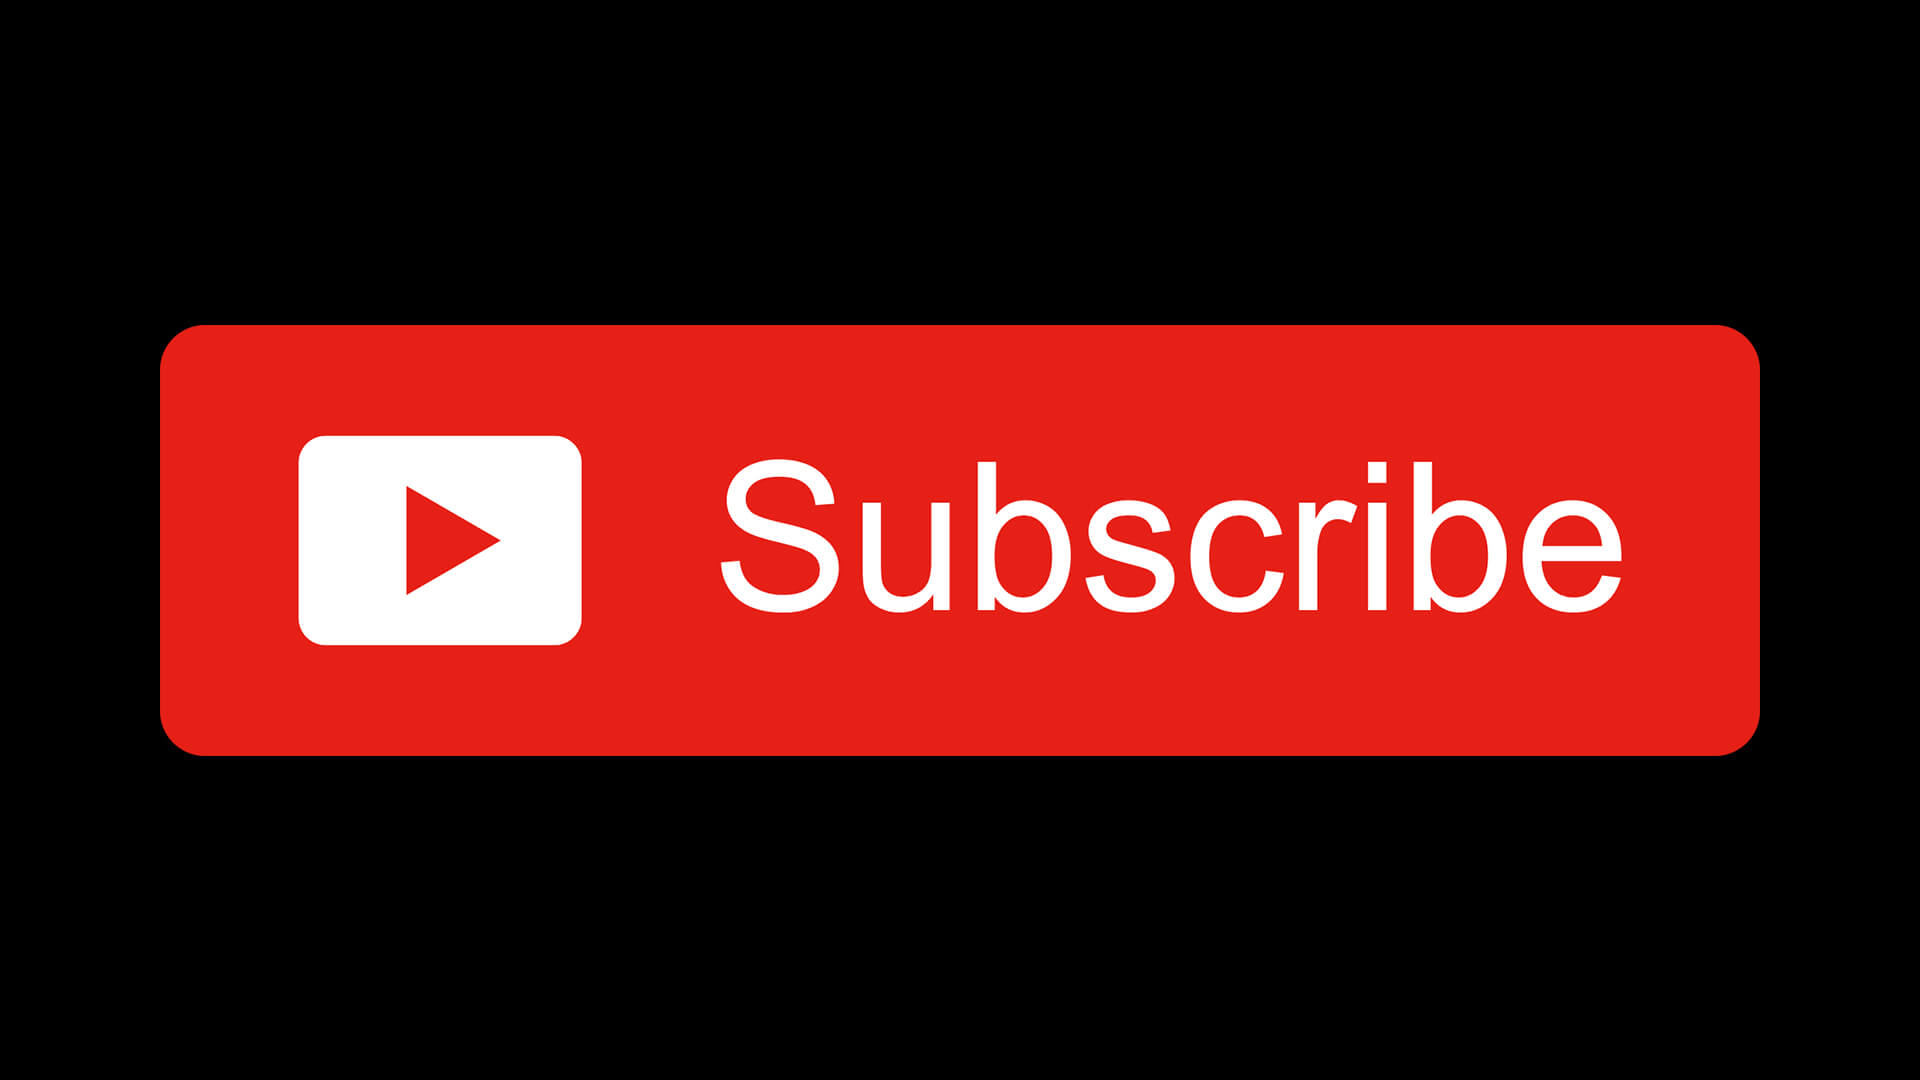 youtube subscribe button image free download